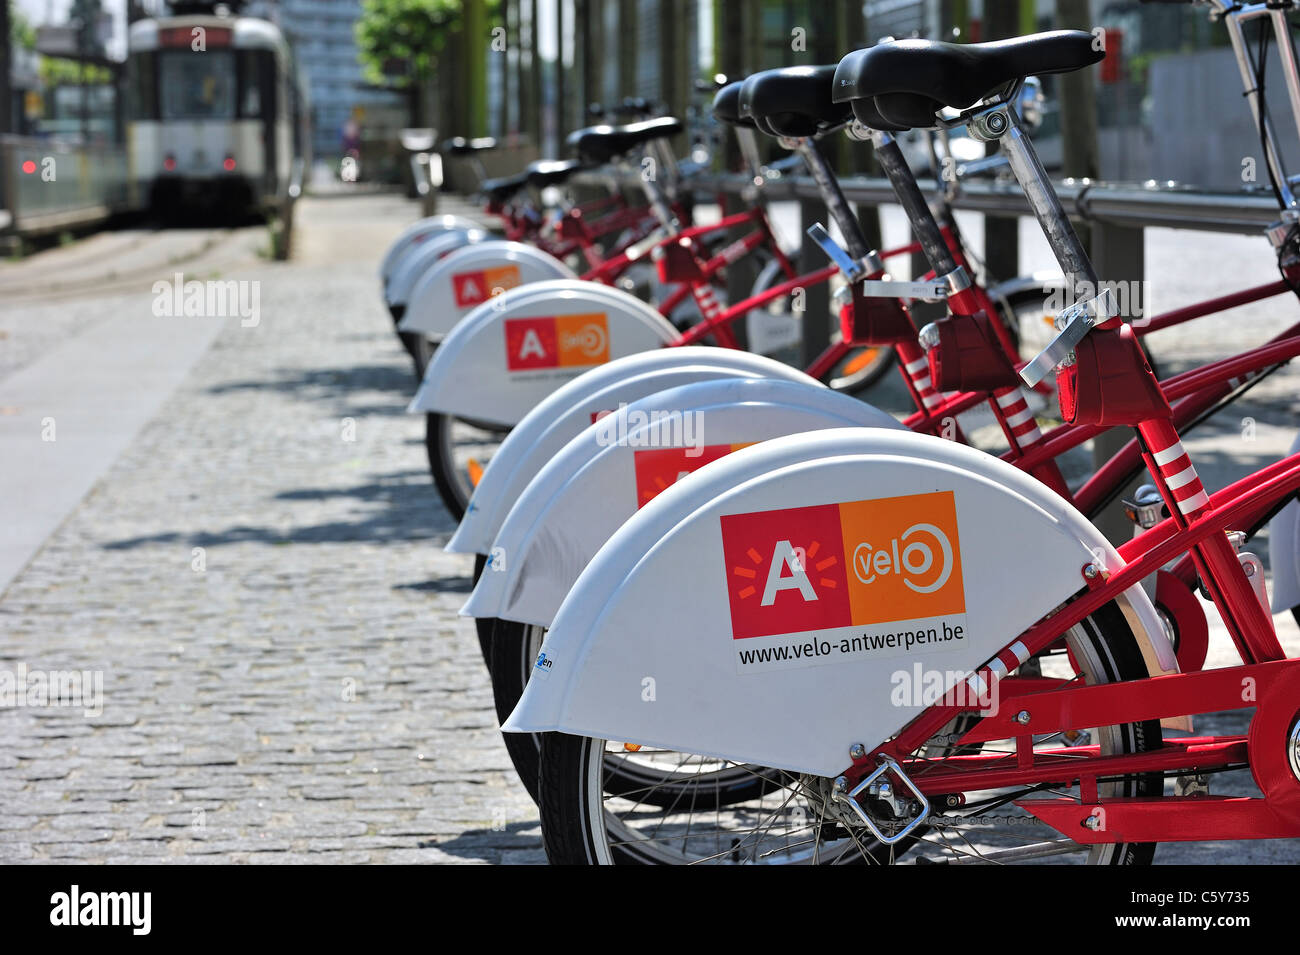 Parked red bicycles in one of the Velo stations at Antwerp, Belgium Stock Photo